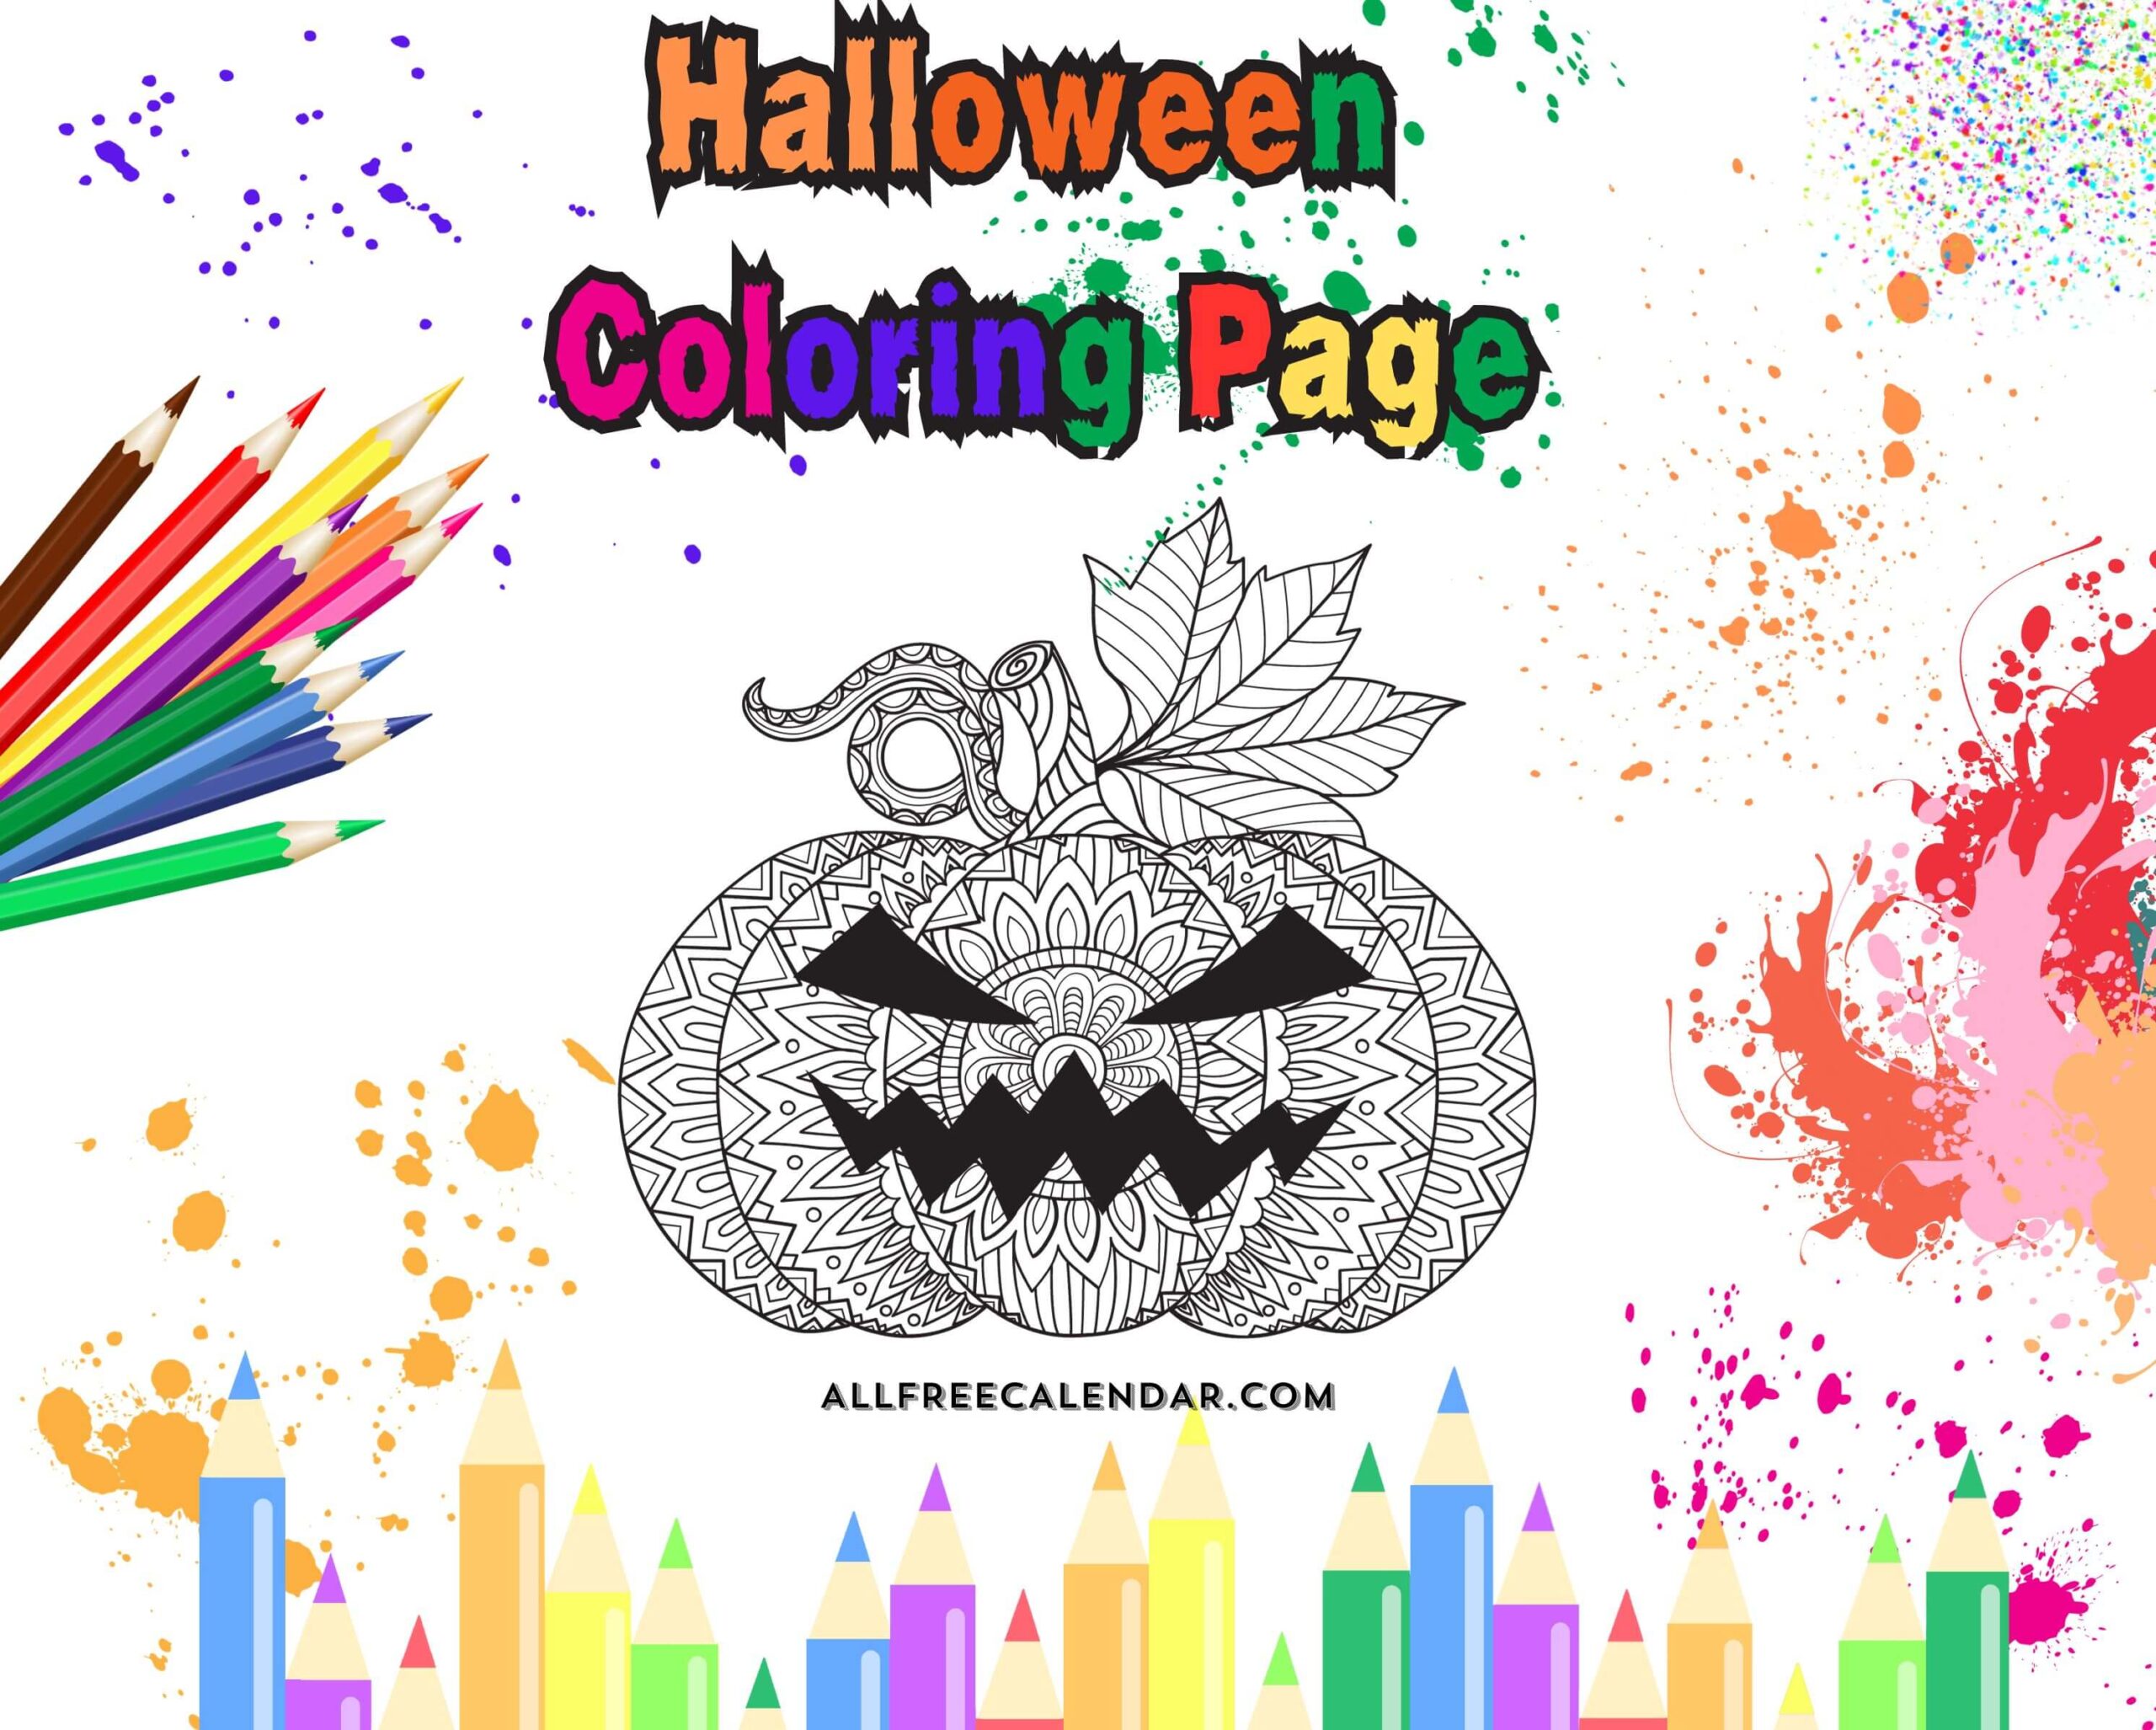 Halloween Coloring Page For All